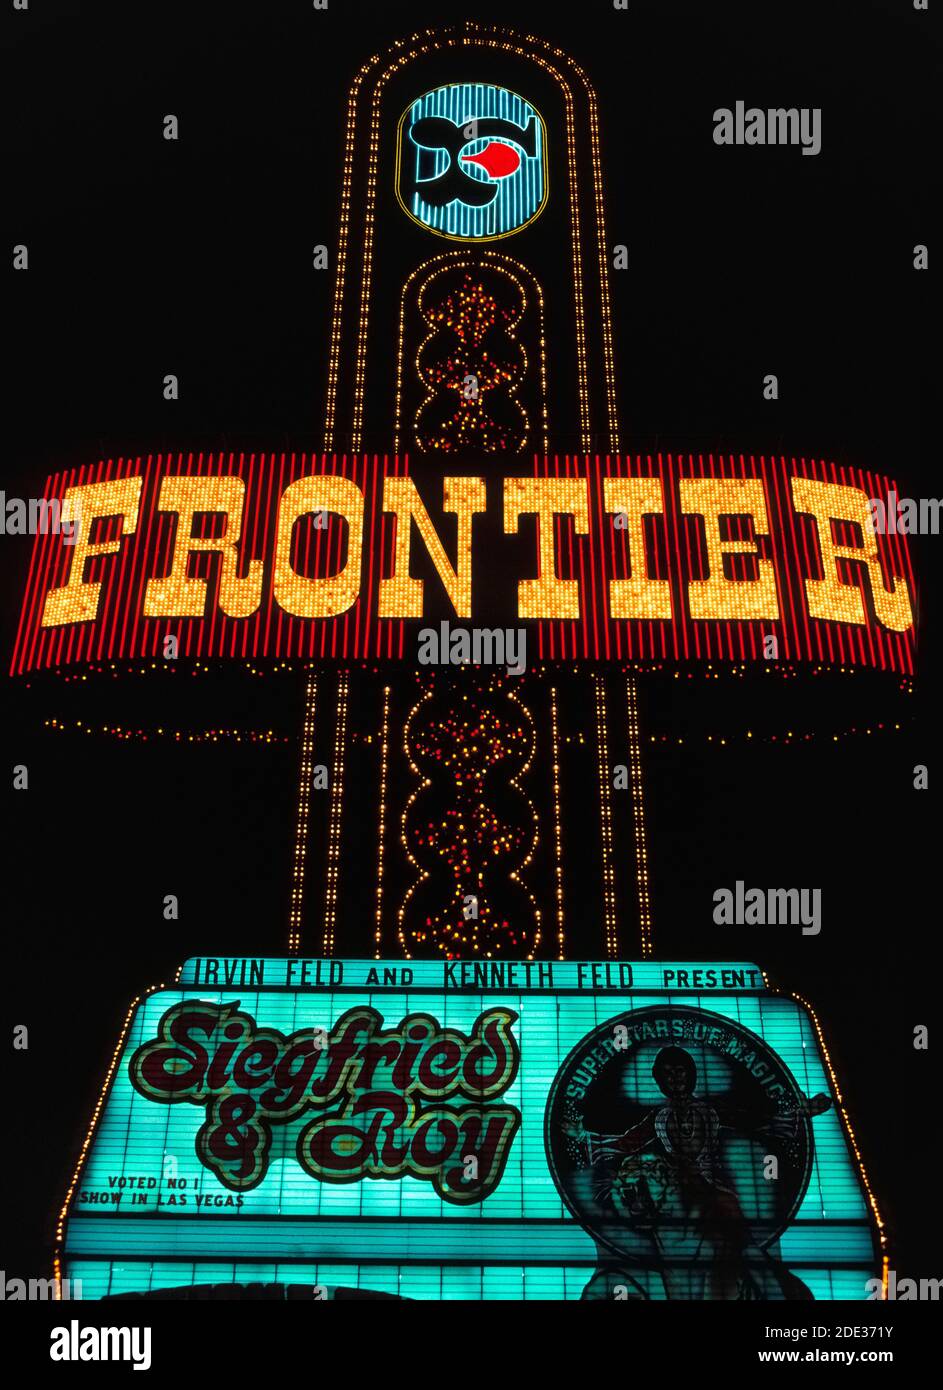 Neon and other colorful lights made this outdoor sign for the Frontier Hotel and Casino stand out at night along Las Vegas Boulevard, better known as the Strip, a roadway lined with spectacular resort hotels and casinos just south of the city limits of Las Vegas, Nevada, USA. The Stardust opened in 1942 and operated for 65 years in that notorious desert destination well-known for its gambling and good times. This historical photograph was taken in 1983 before the Frontier was demolished in 2007. The sign advertises the star entertainers in the hotel's showroom, magicians Siegfried and Roy. Stock Photo